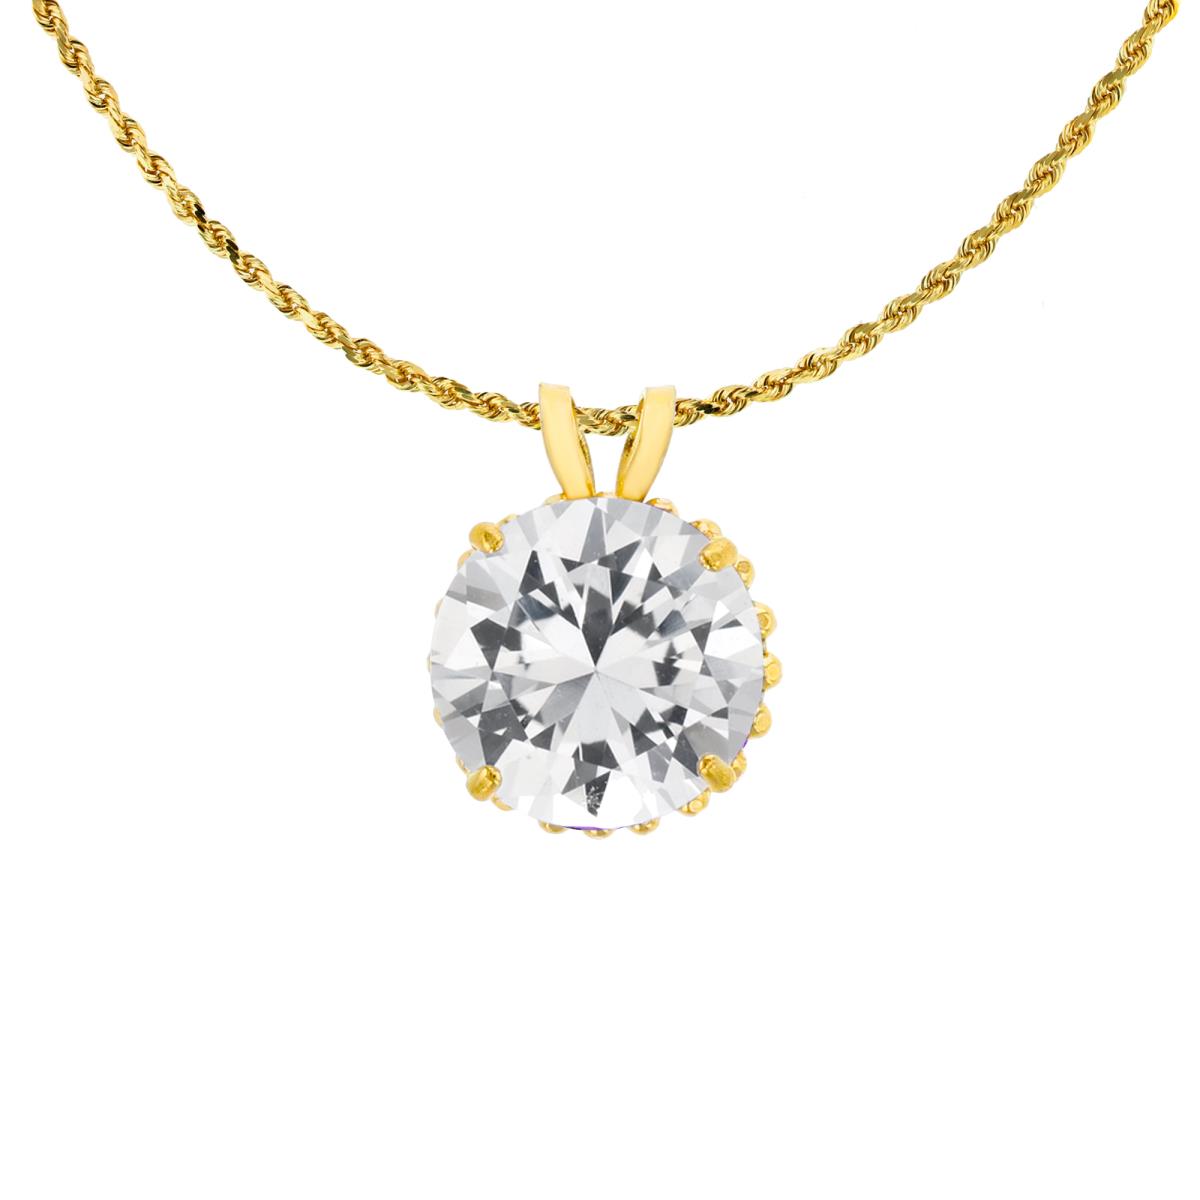 14K Yellow Gold 7mm Rd Cut Created White Sapphire with Bead Frame Rabbit Ear 18" Rope Chain Necklace